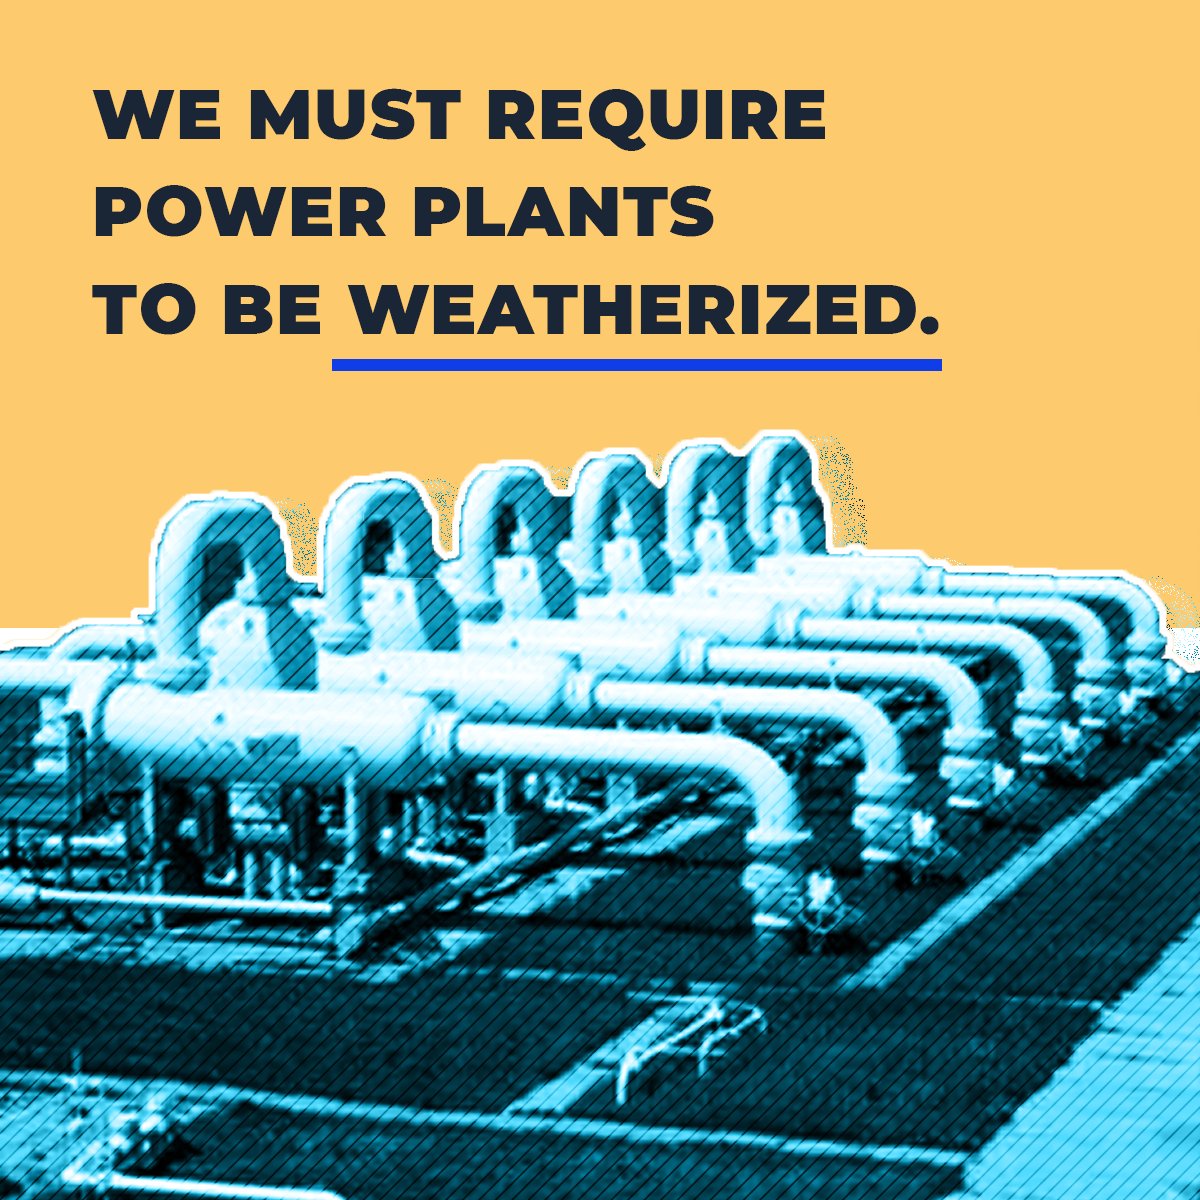 Texas lawmakers must mandate changes to the energy infrastructure to improve resiliency in response to the 2021 Texas Winter Storm Freeze. These investments should be paid for by the energy #fossilfuel companies, NOT with the #taxpayer dollar$. ✊
.
.
#TexasBlackout #TexasFreeze